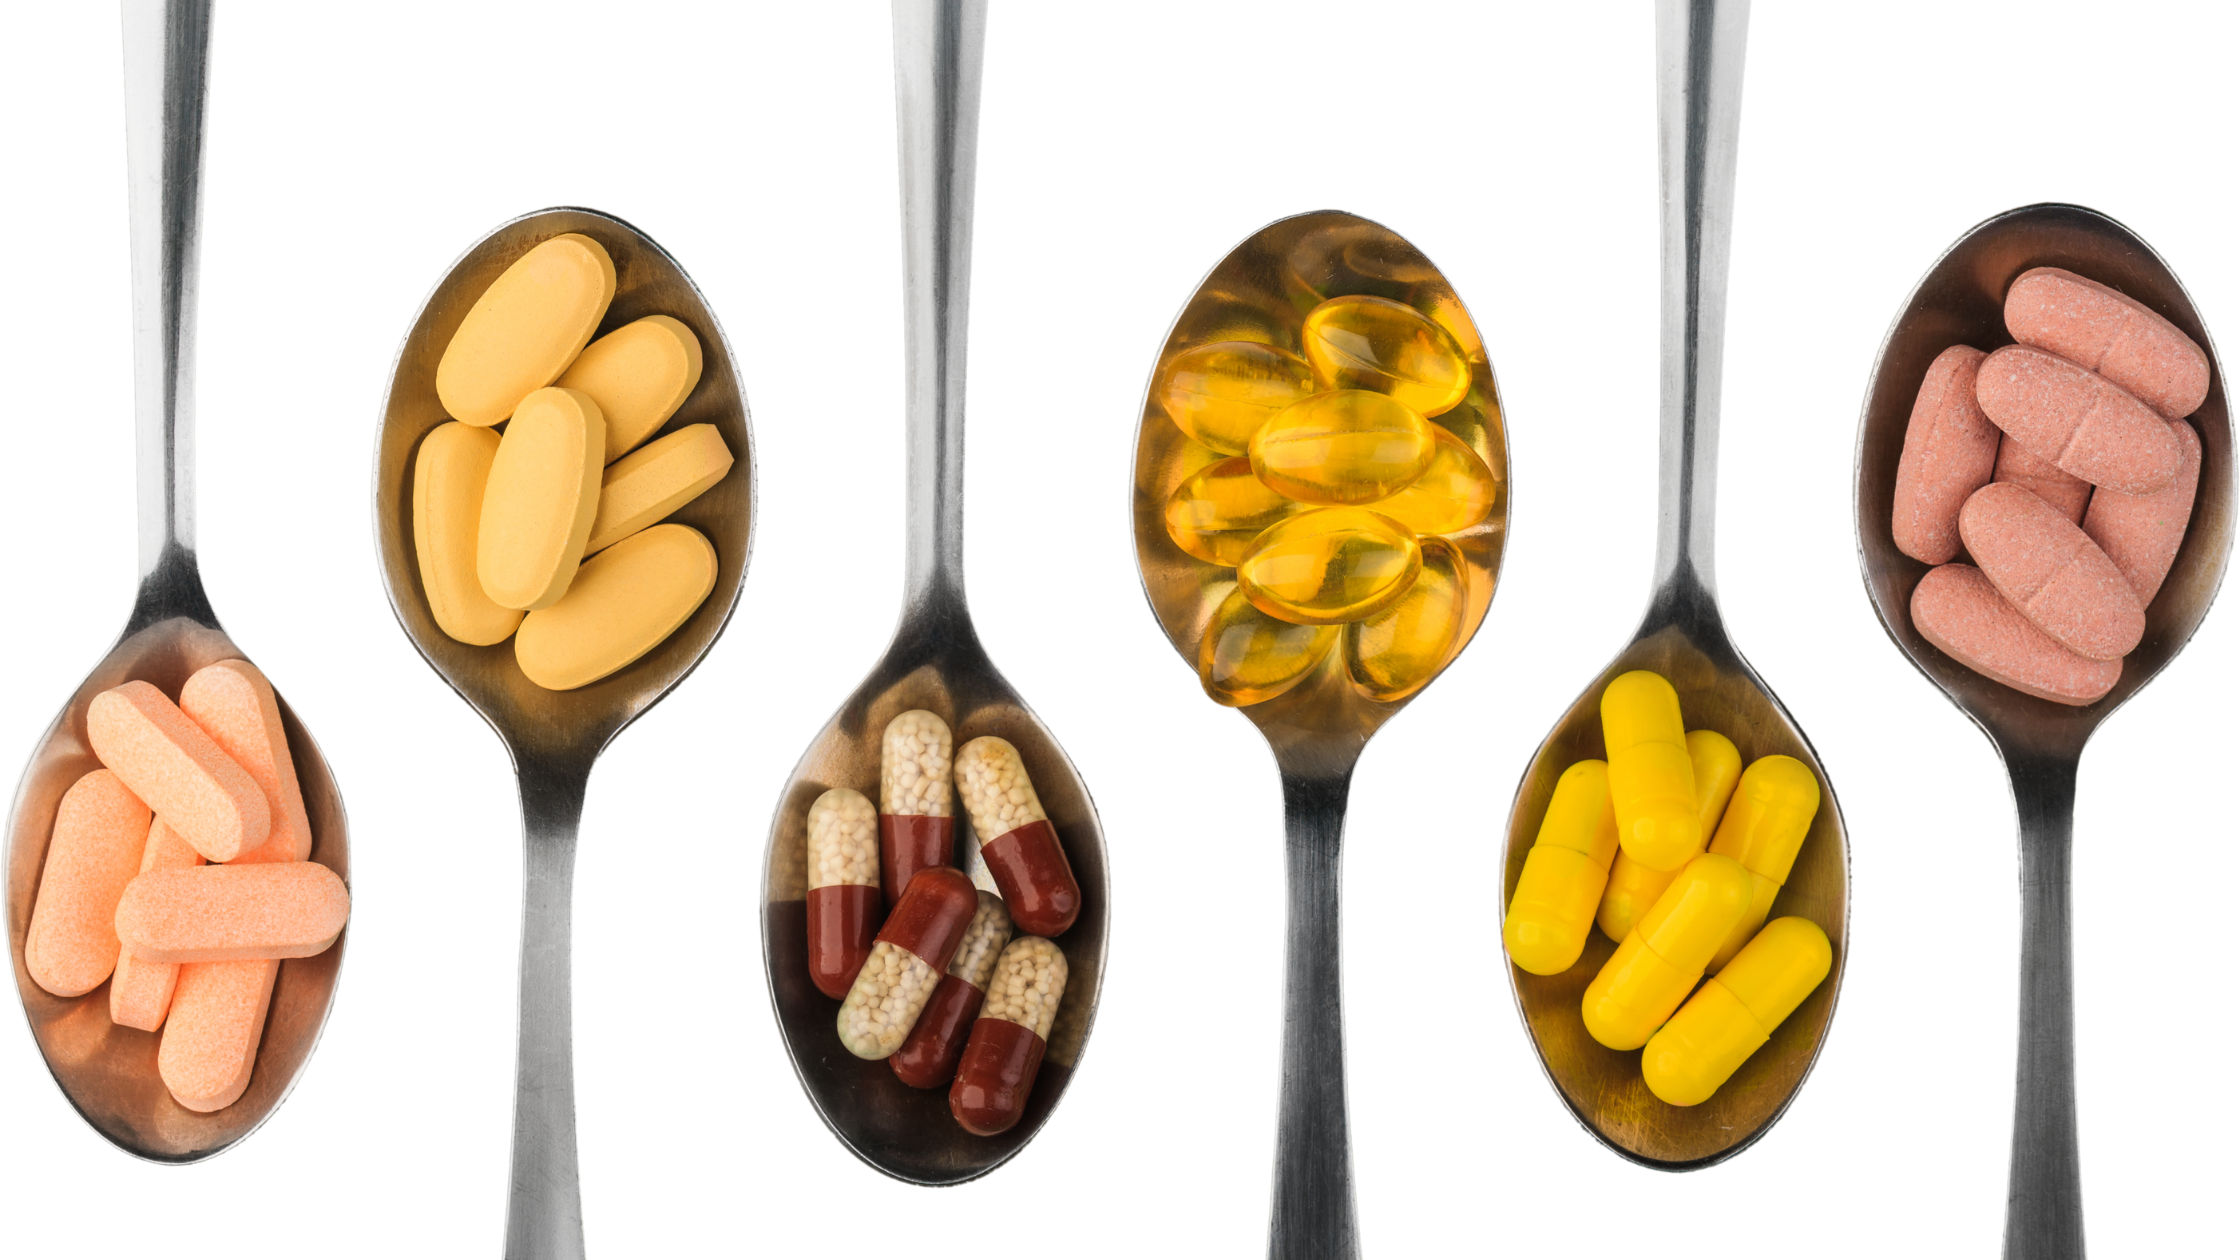 many supplements are just marketing hype